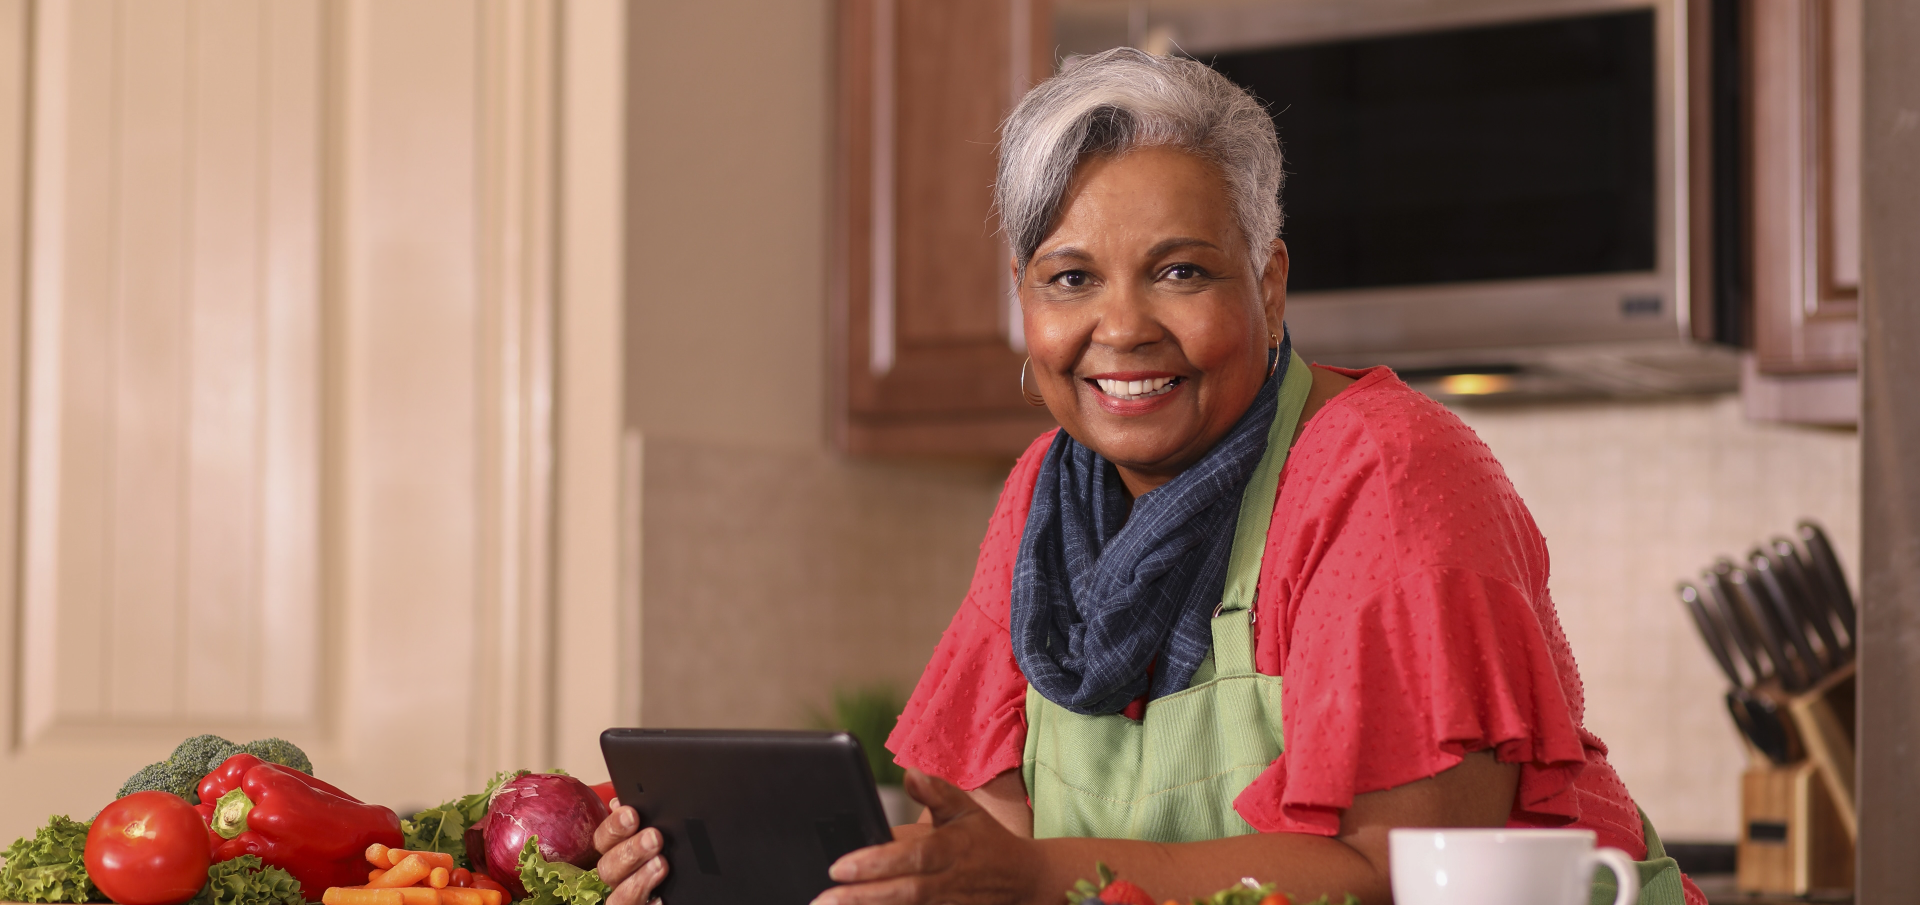 A woman standing at a kitchen counter with an iPad in her hands and she's smiling while looking at the camera. There are vegetables on her counter beside her